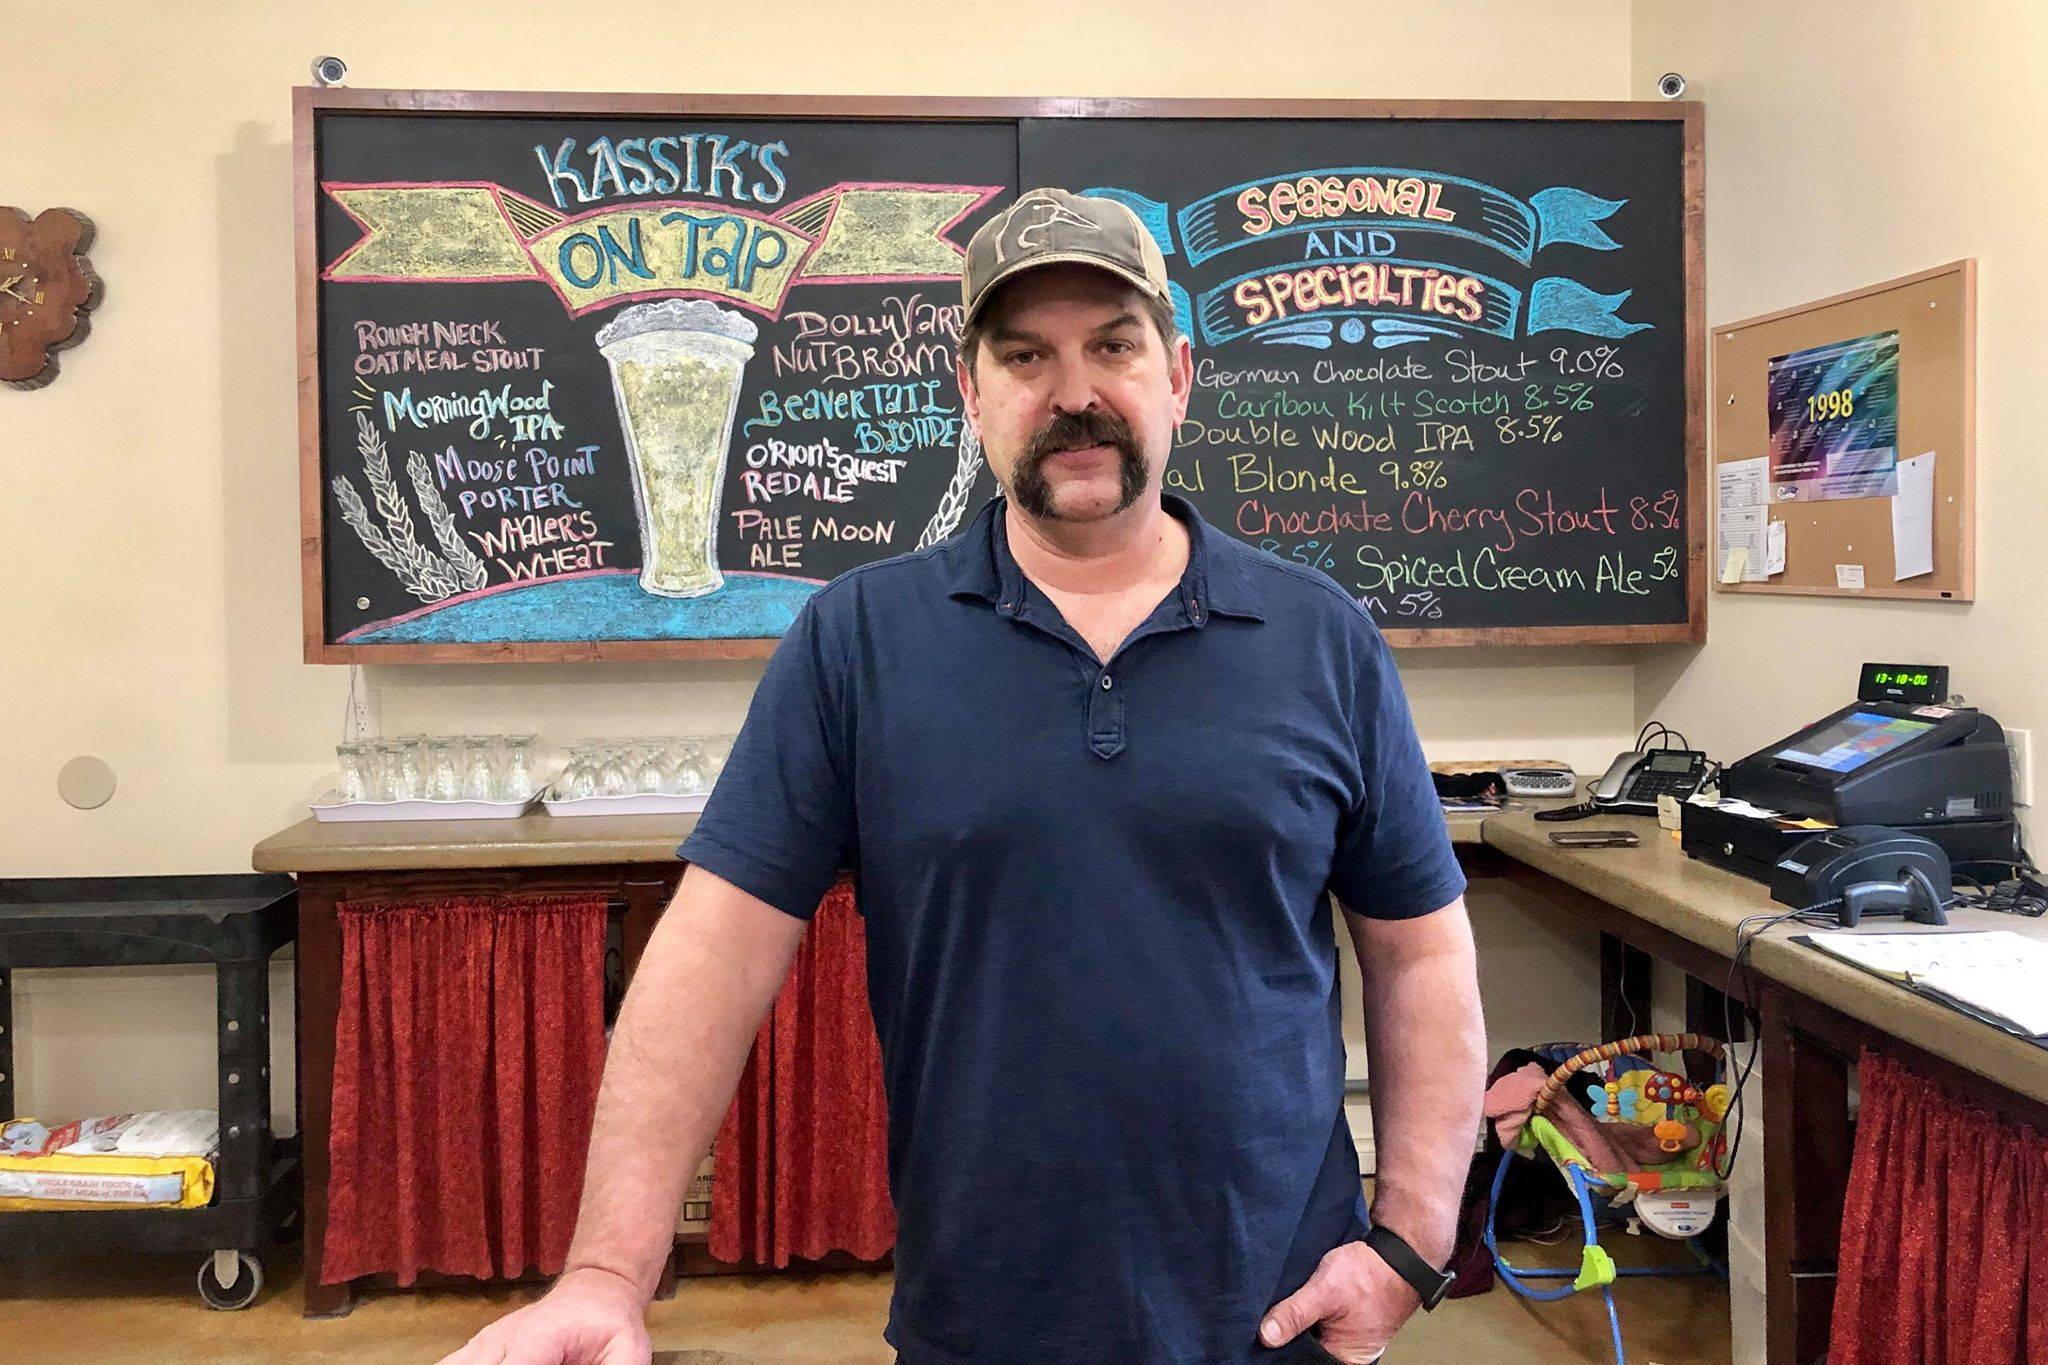 Rick McGlasson, who bought Kassik’s Brewery in Nikiski with his wife Michelle, held a meet and greet event last week at the brewery’s taproom, on Dec. 13, 2019, in Nikiski, Alaska. (Photo by Victoria Petersen/Peninsula Clarion)